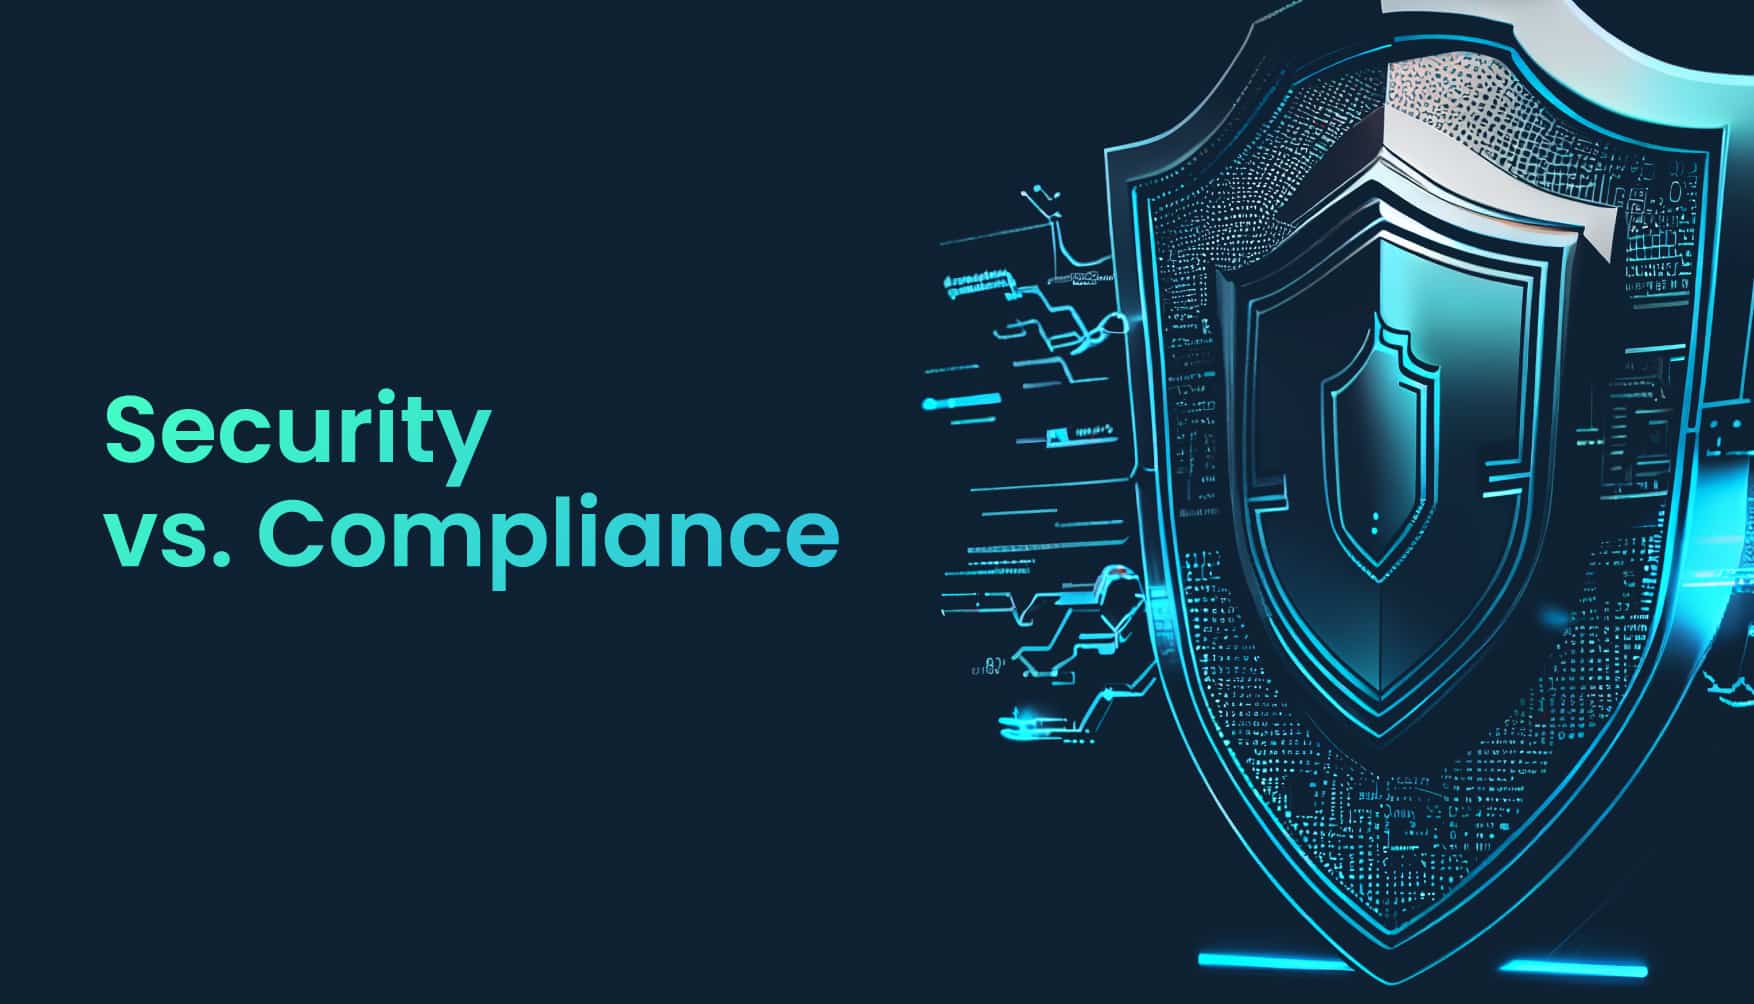 How do Security & Compliance differ? Ultimate comprehensive guide